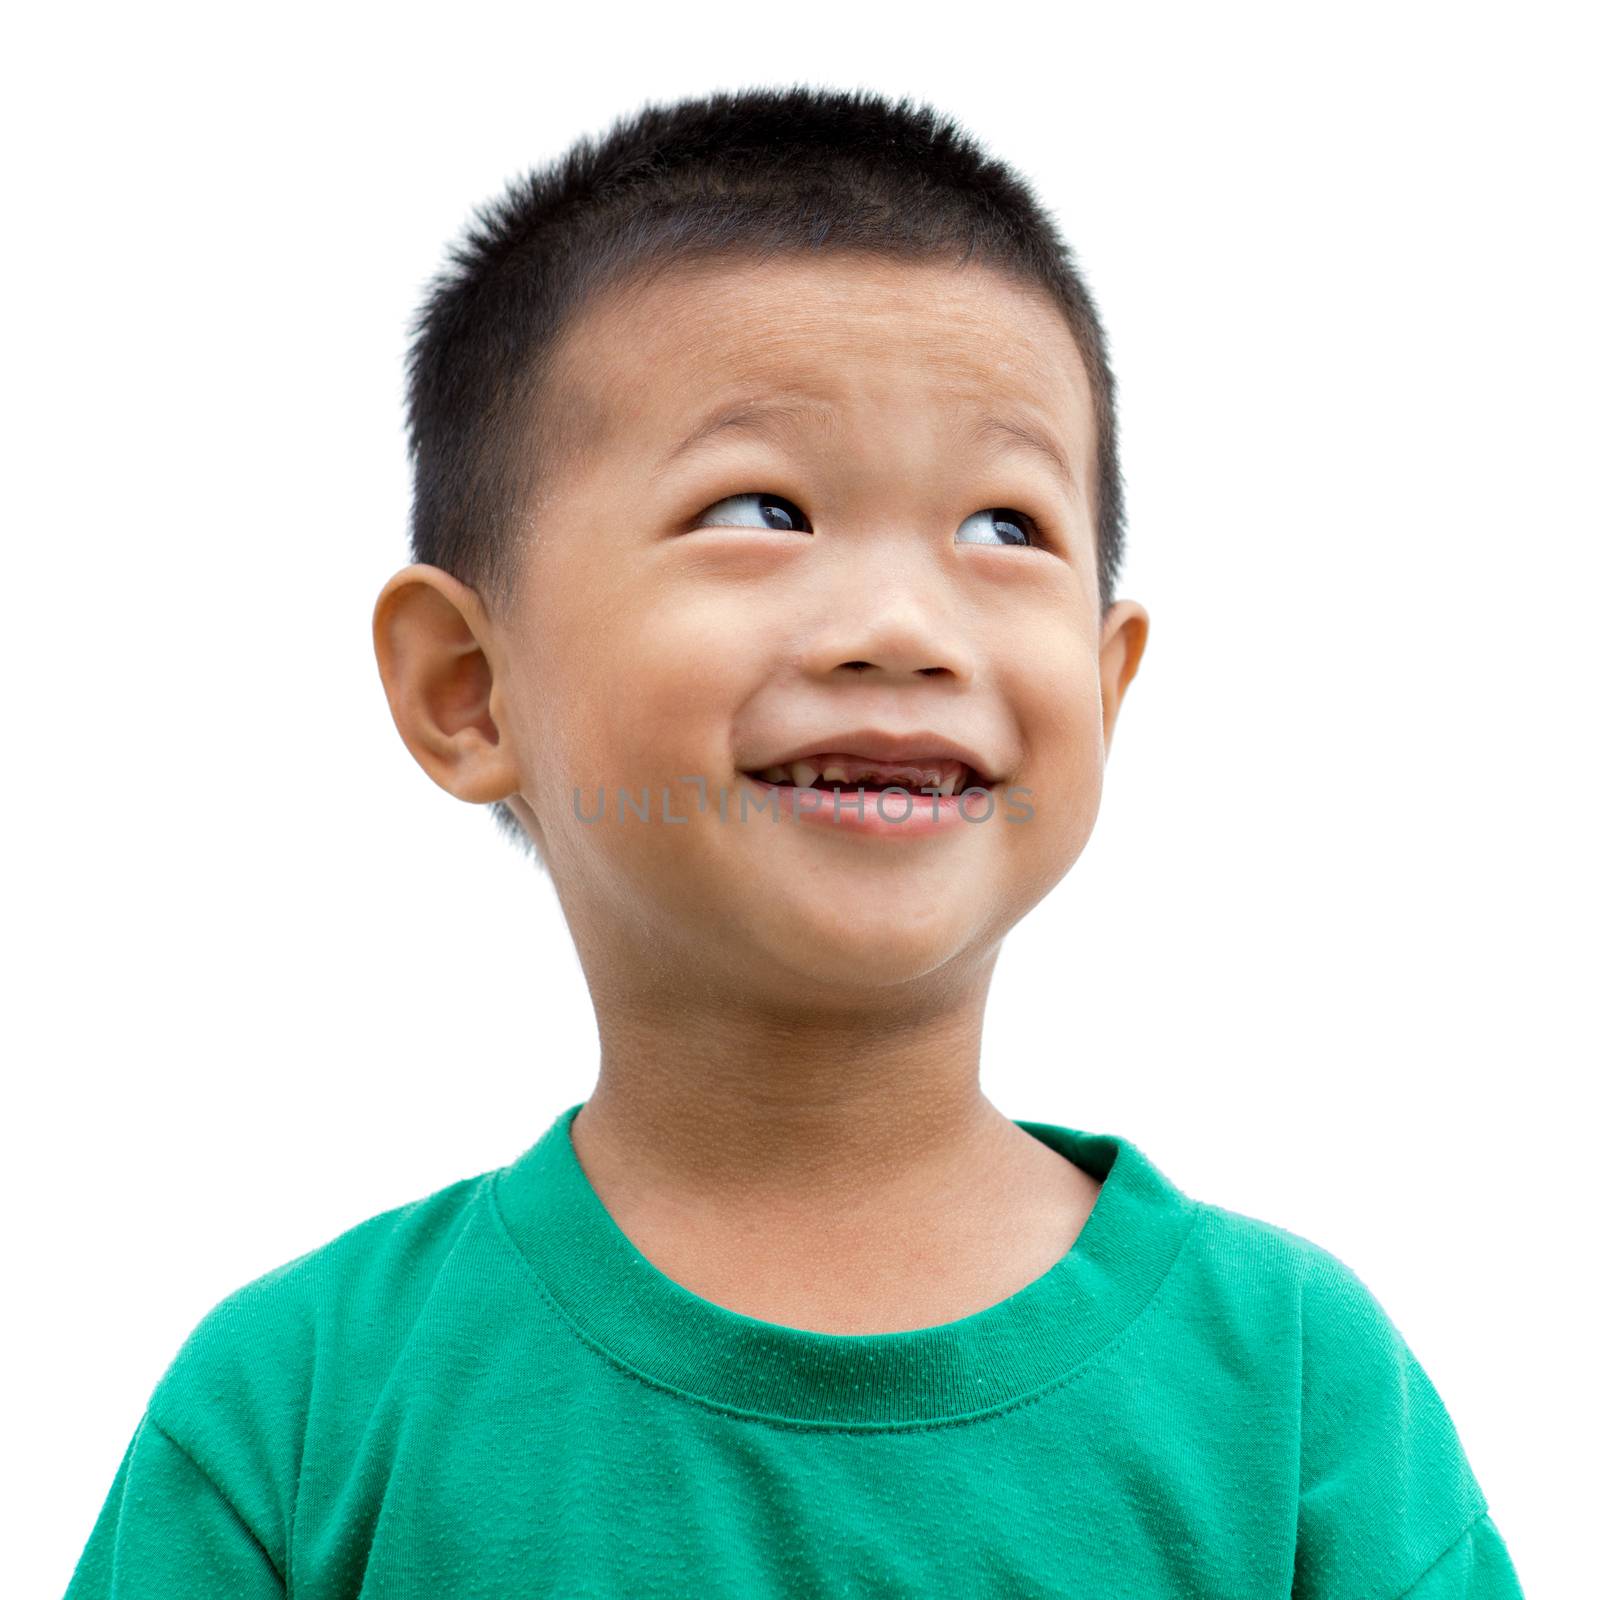 Headshot of happy Asian child smiling and looking up. Portrait of young boy isolated on white background.